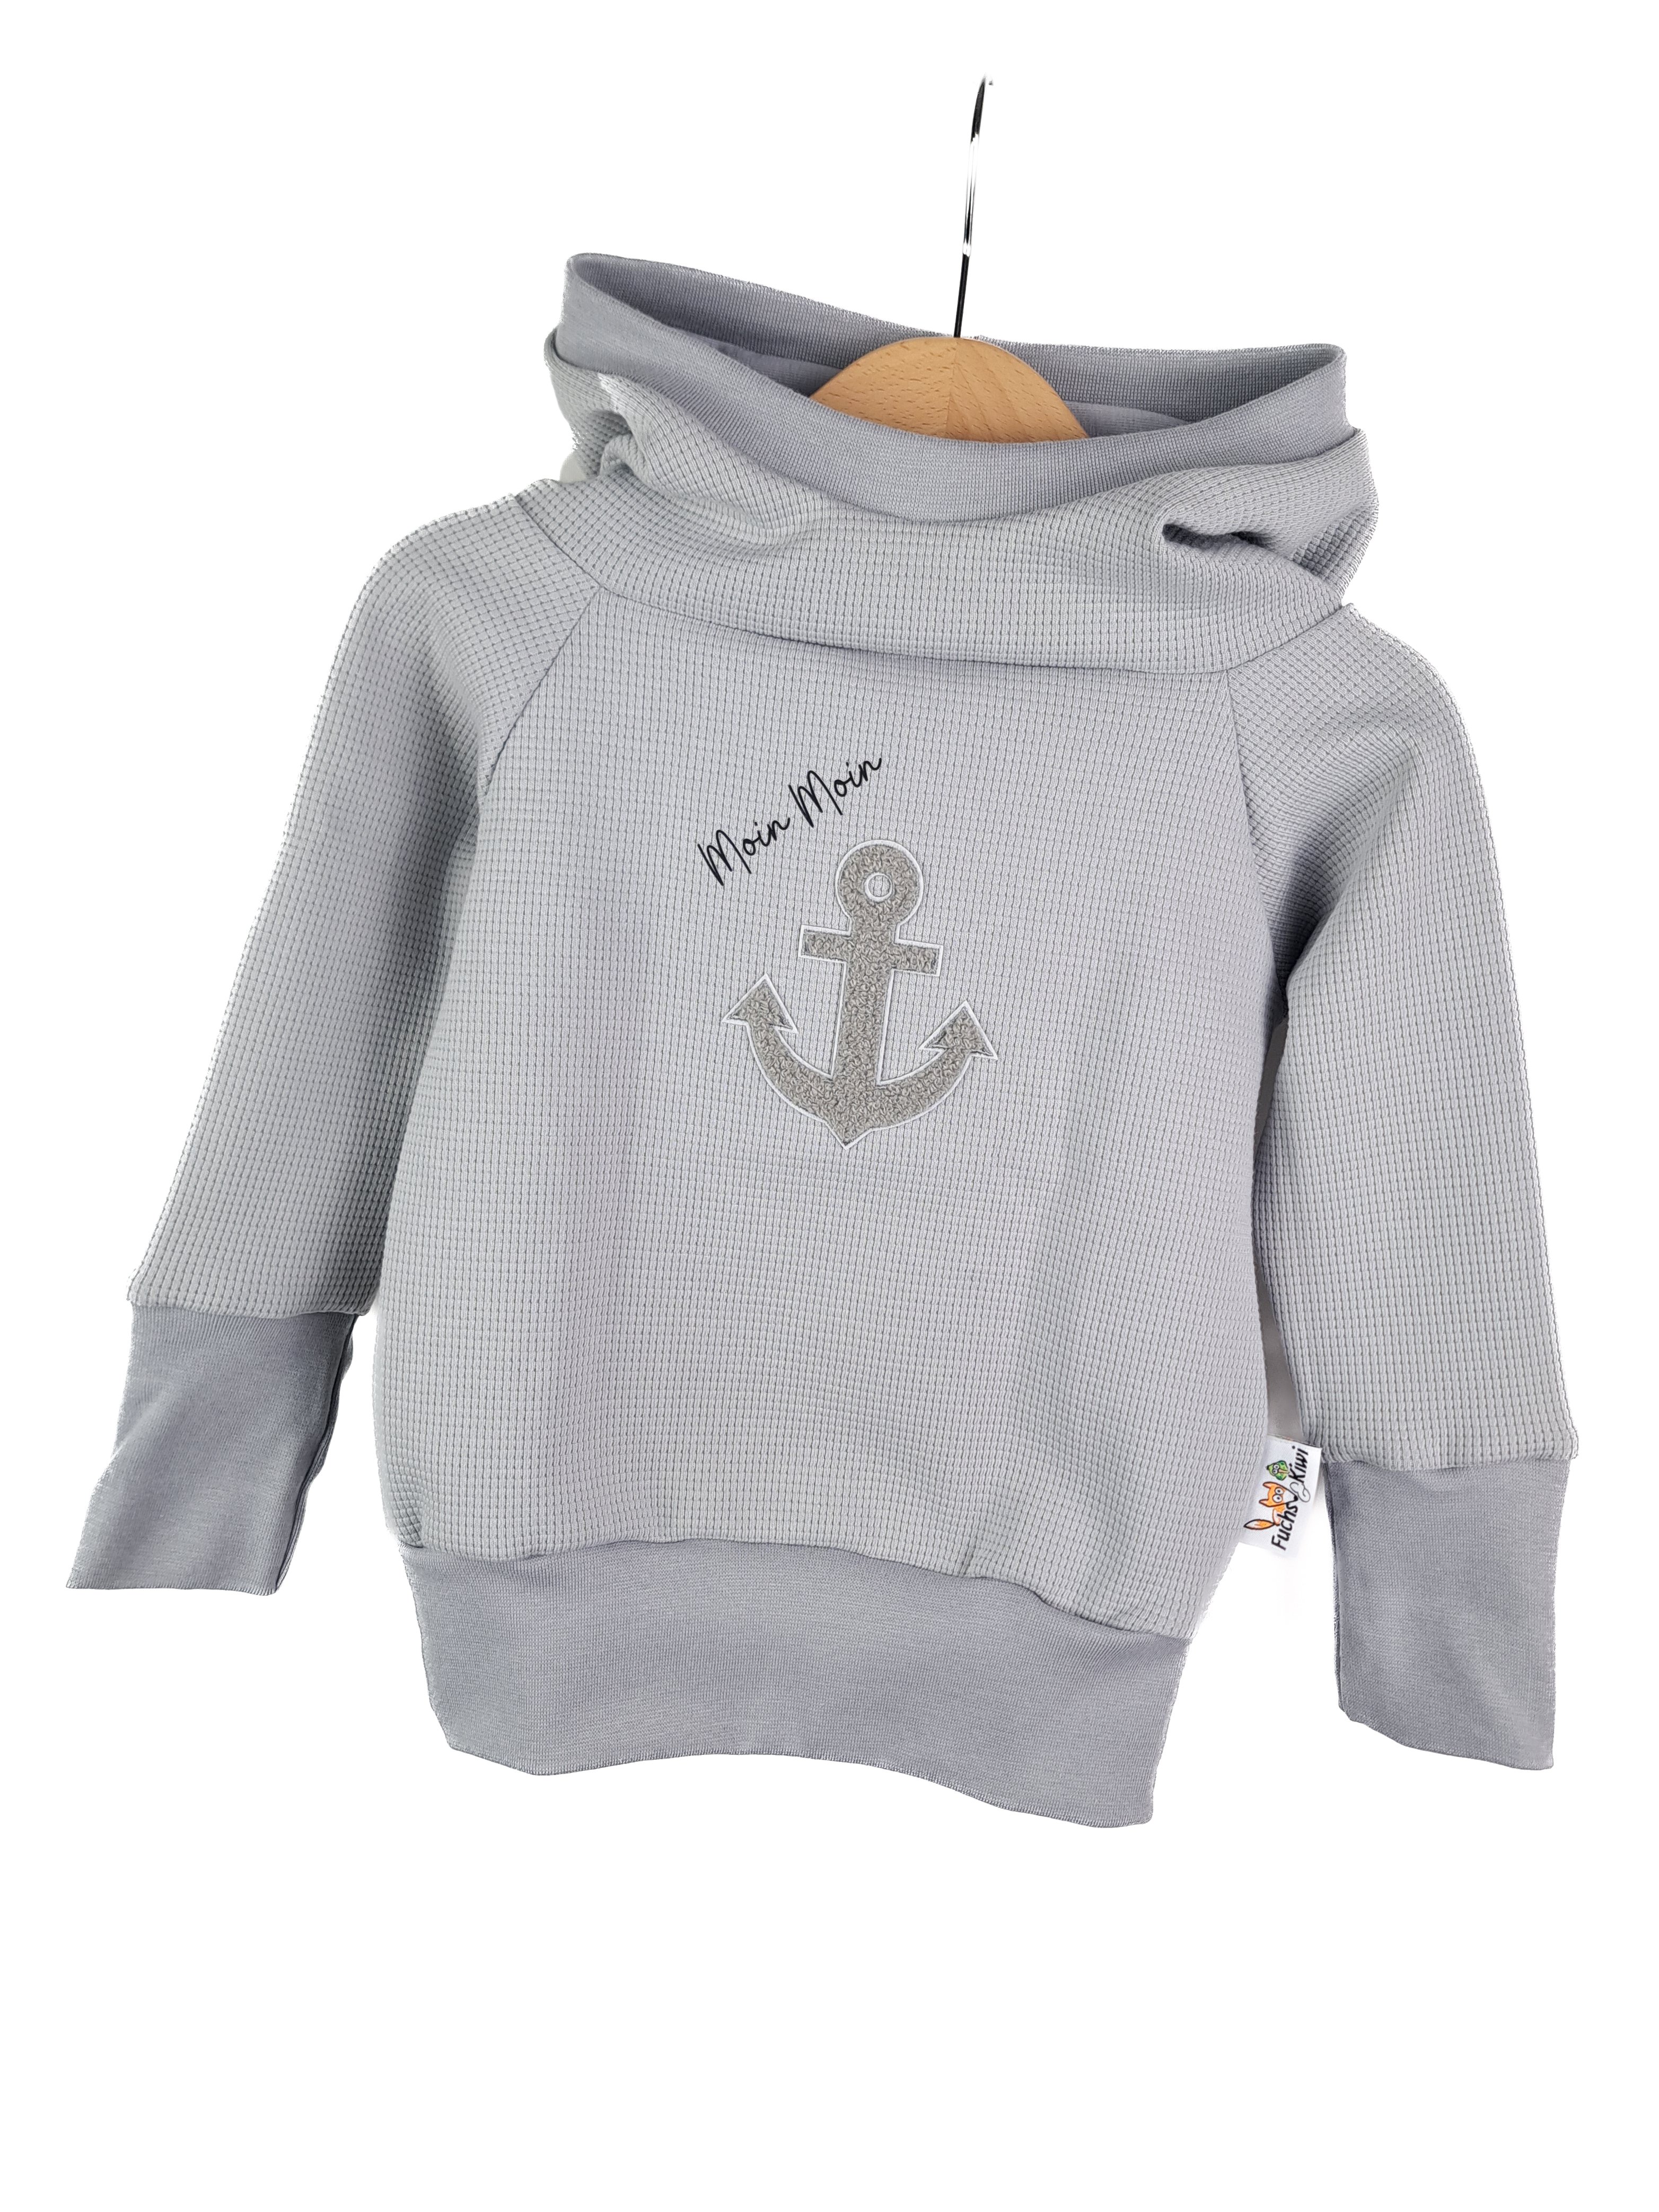 Hoodie Anker-Patch